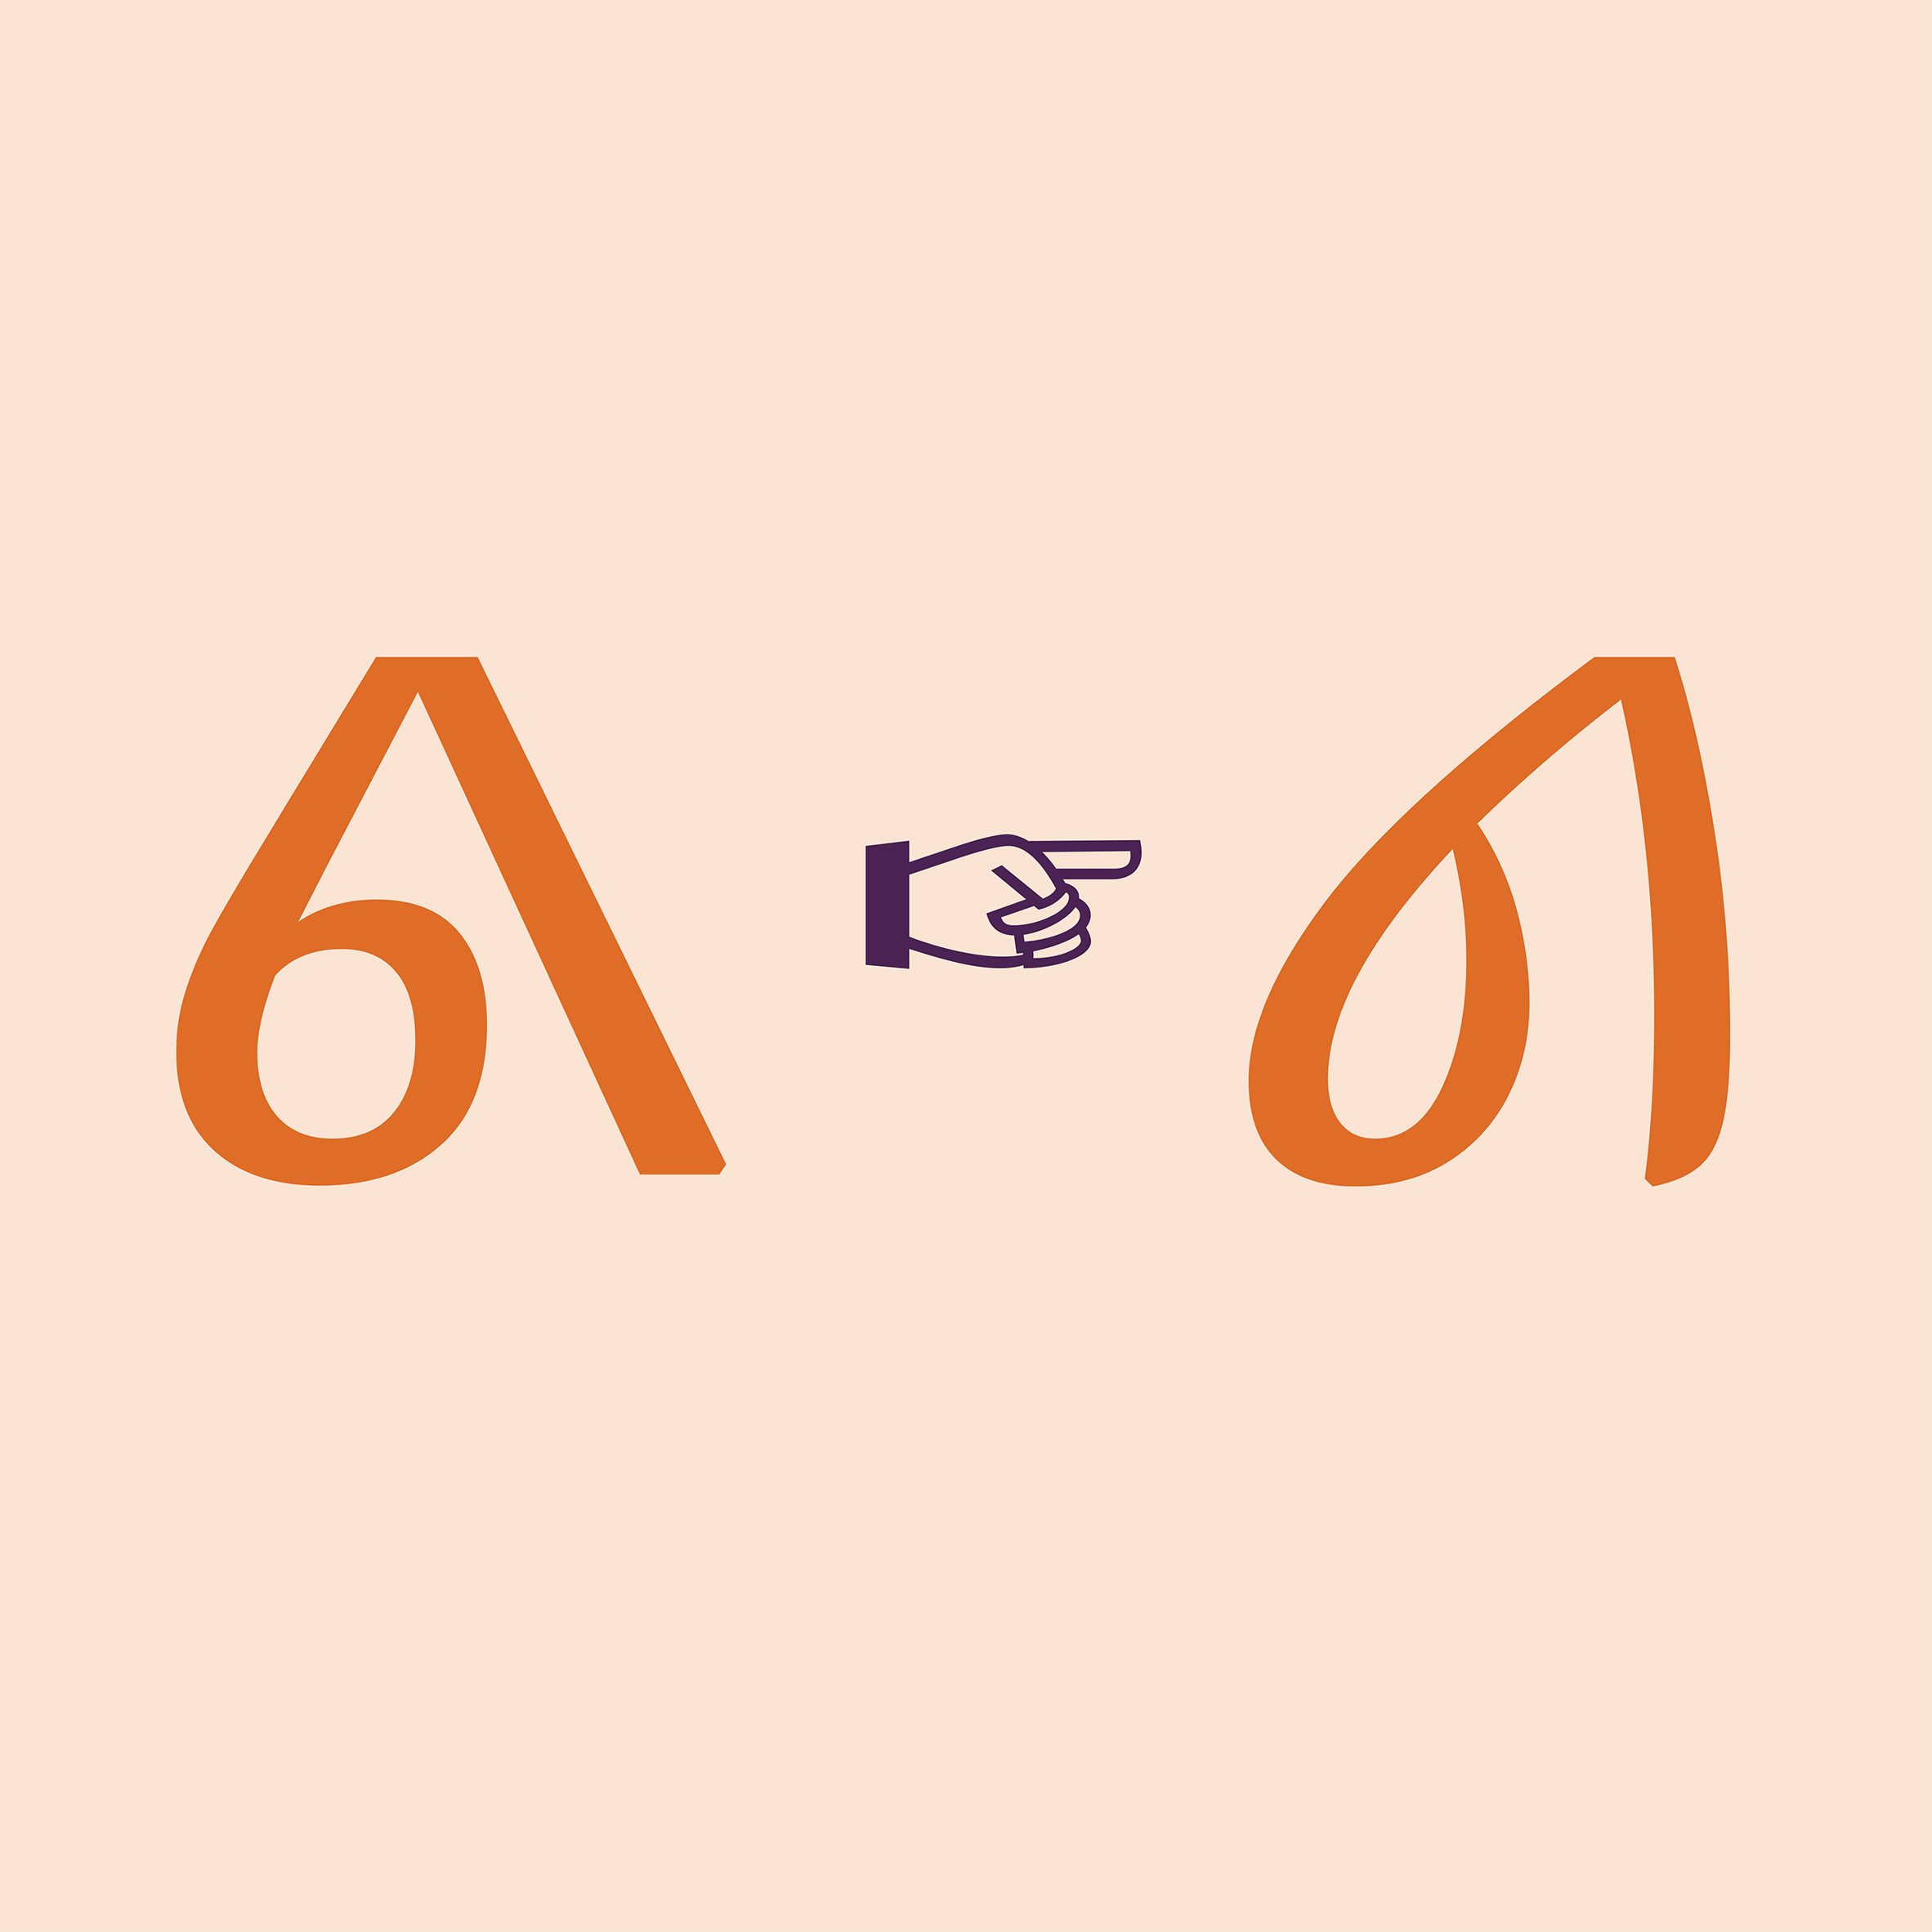 Lava syllabics typeface in regular and secondary cursive style